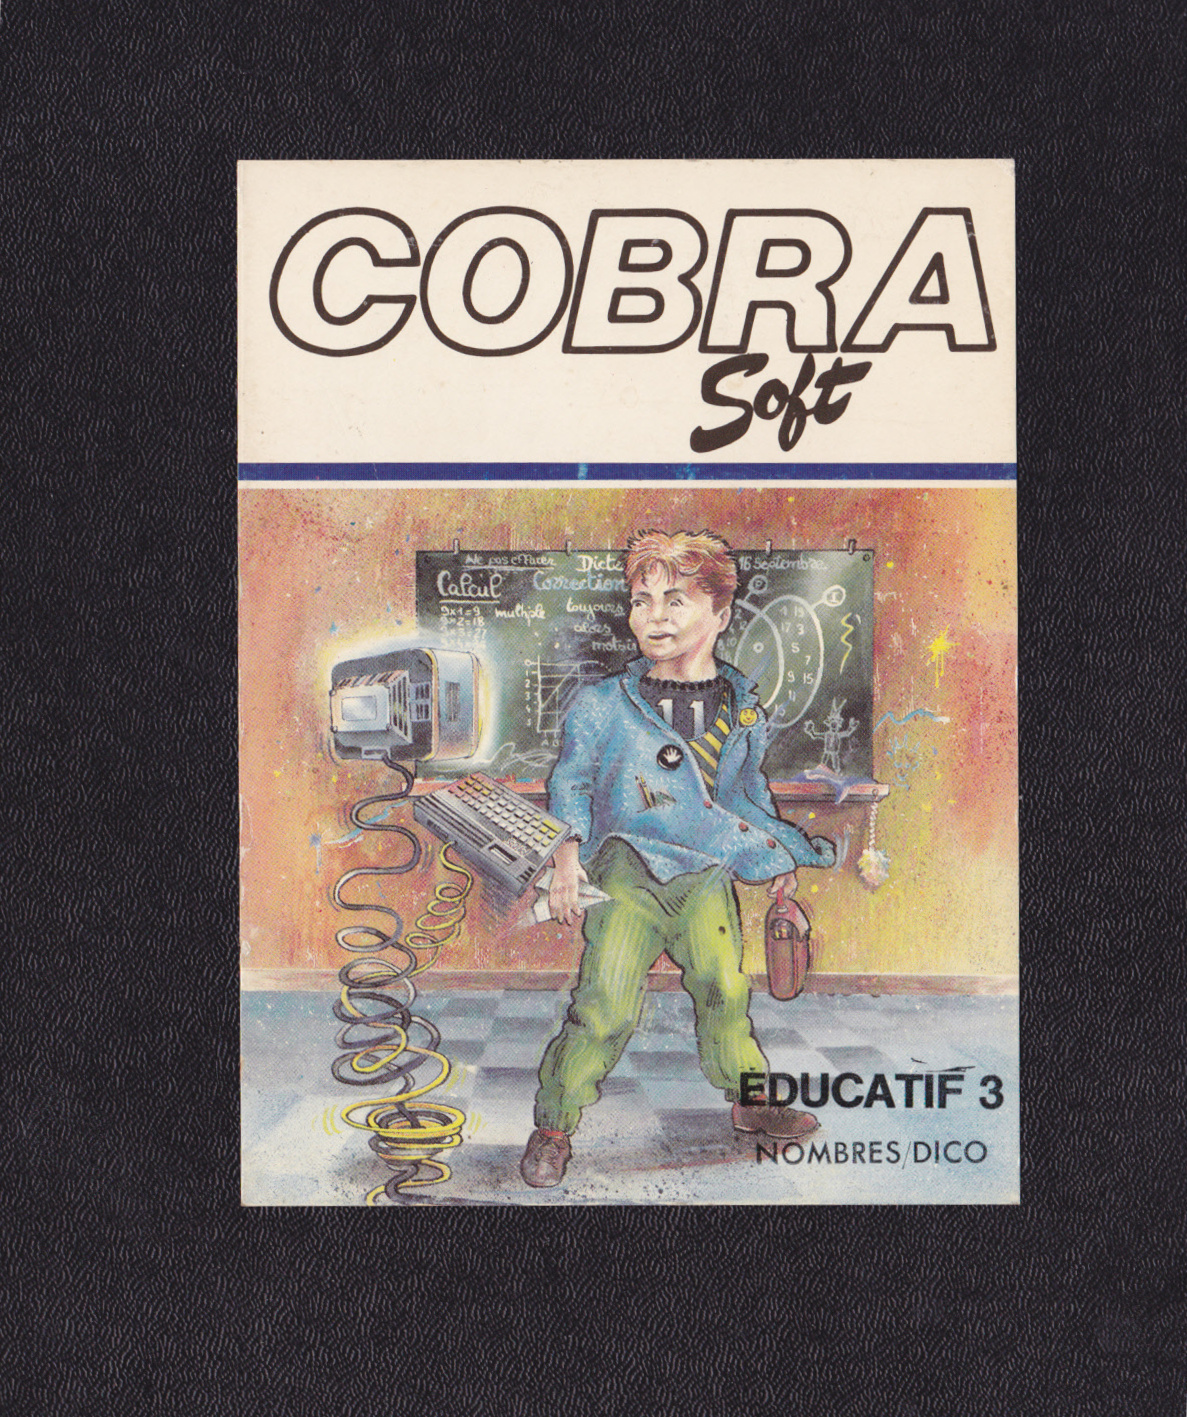 cover of the Amstrad CPC game Educatif 3  by GameBase CPC